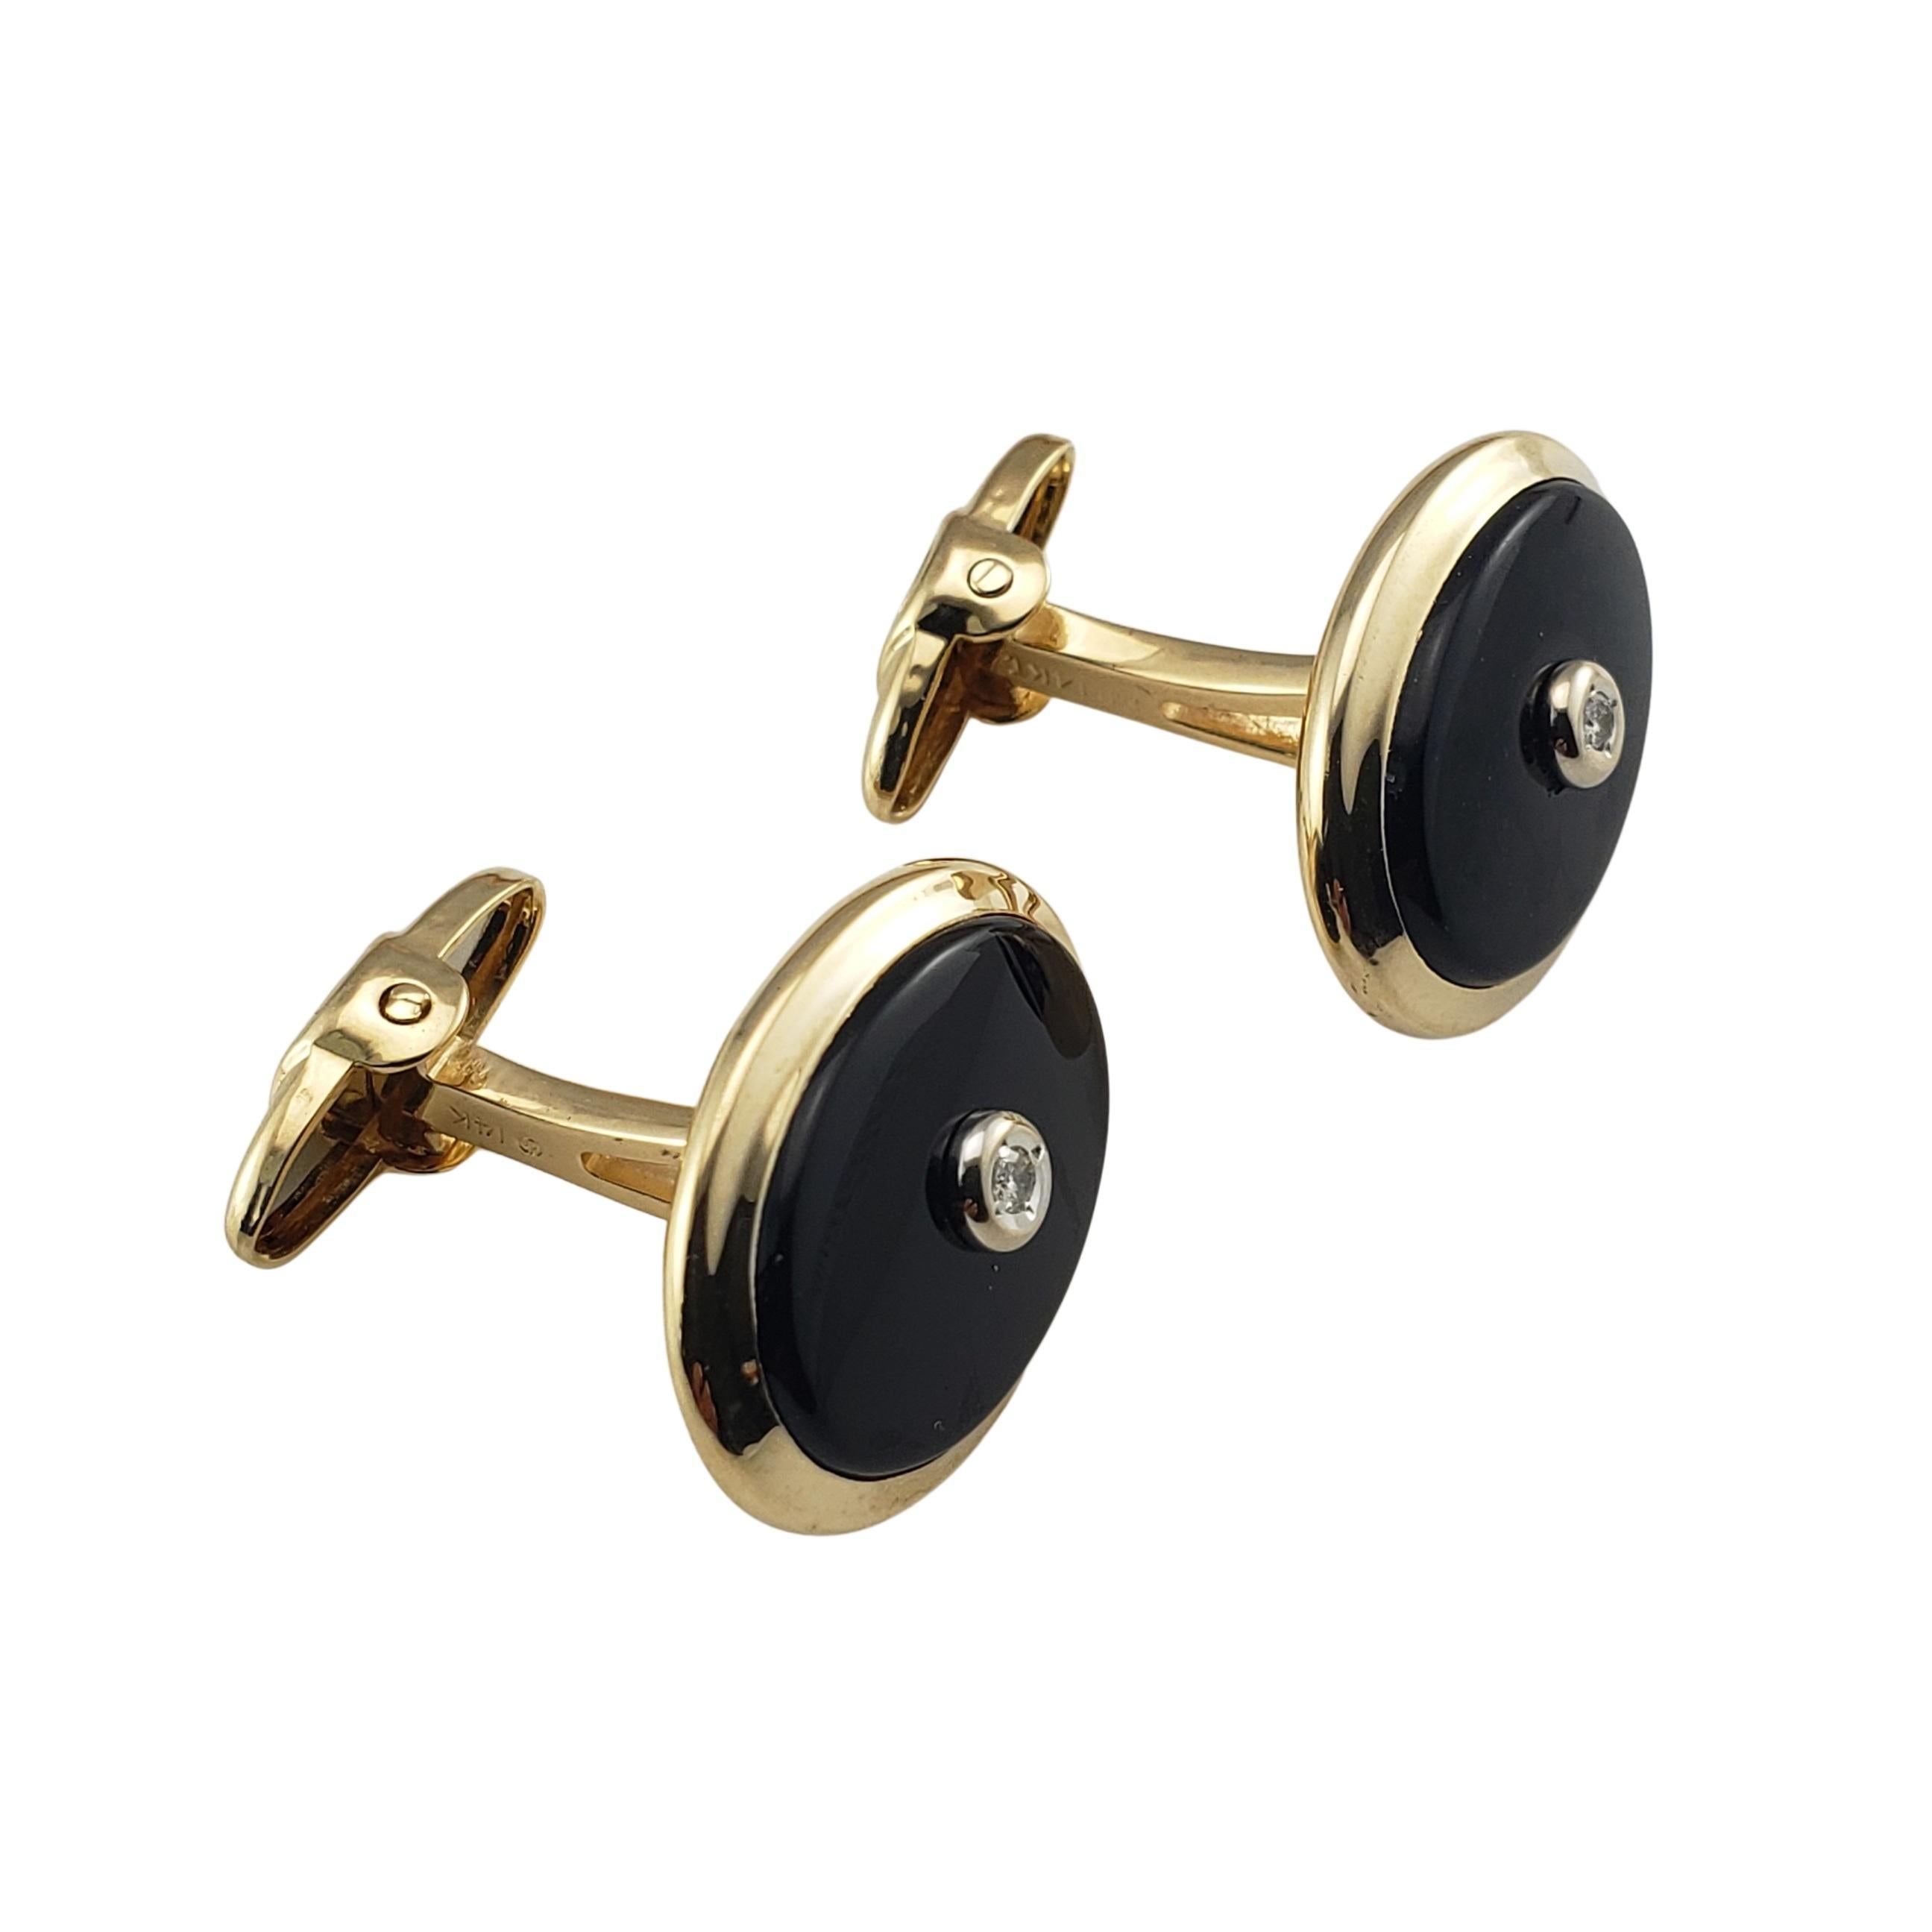 Vintage 14 Karat Yellow Gold Dolan Bullock Onyx and Diamond Cufflinks-

These elegant onyx cufflinks are each accented with one round brilliant cut diamond and set in classic 14K yellow gold.

Approximate total diamond weight:  .06 ct.

Diamond